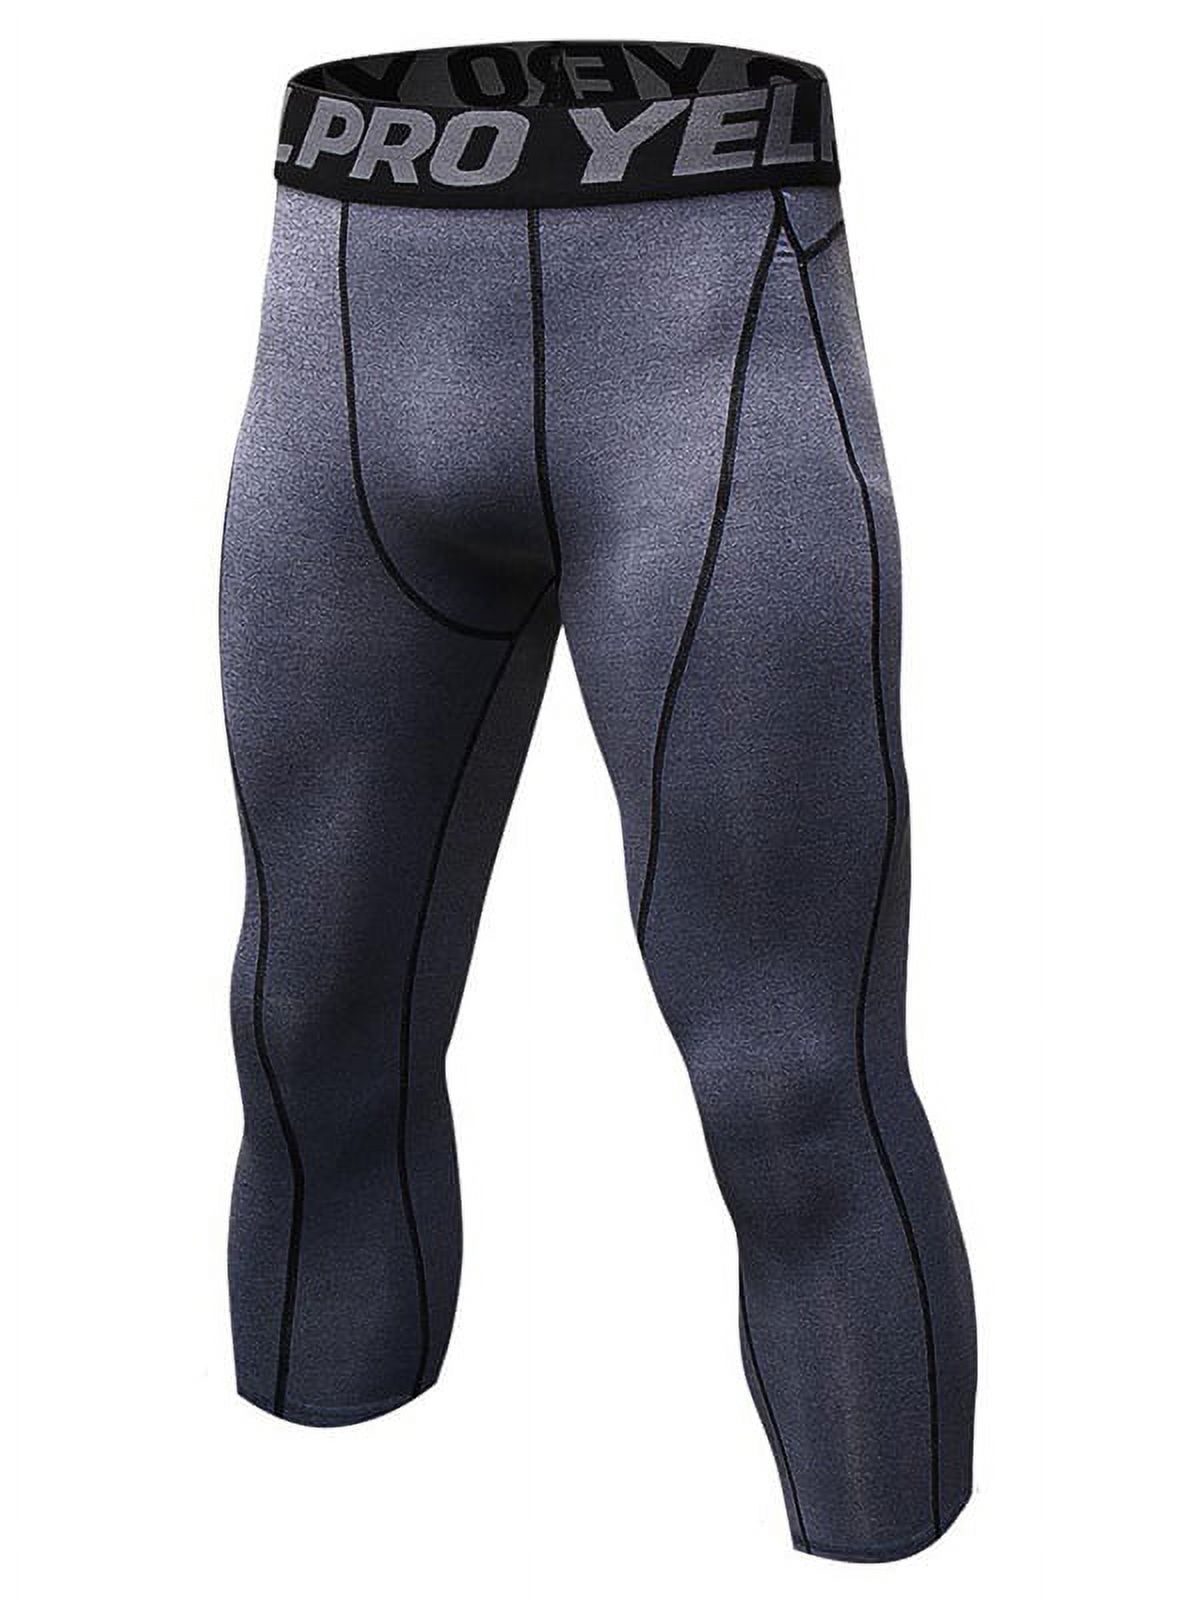 Men 3/4 Leggings Fitness Compression Sports Tights Base Layer Yoga Pants - image 1 of 2